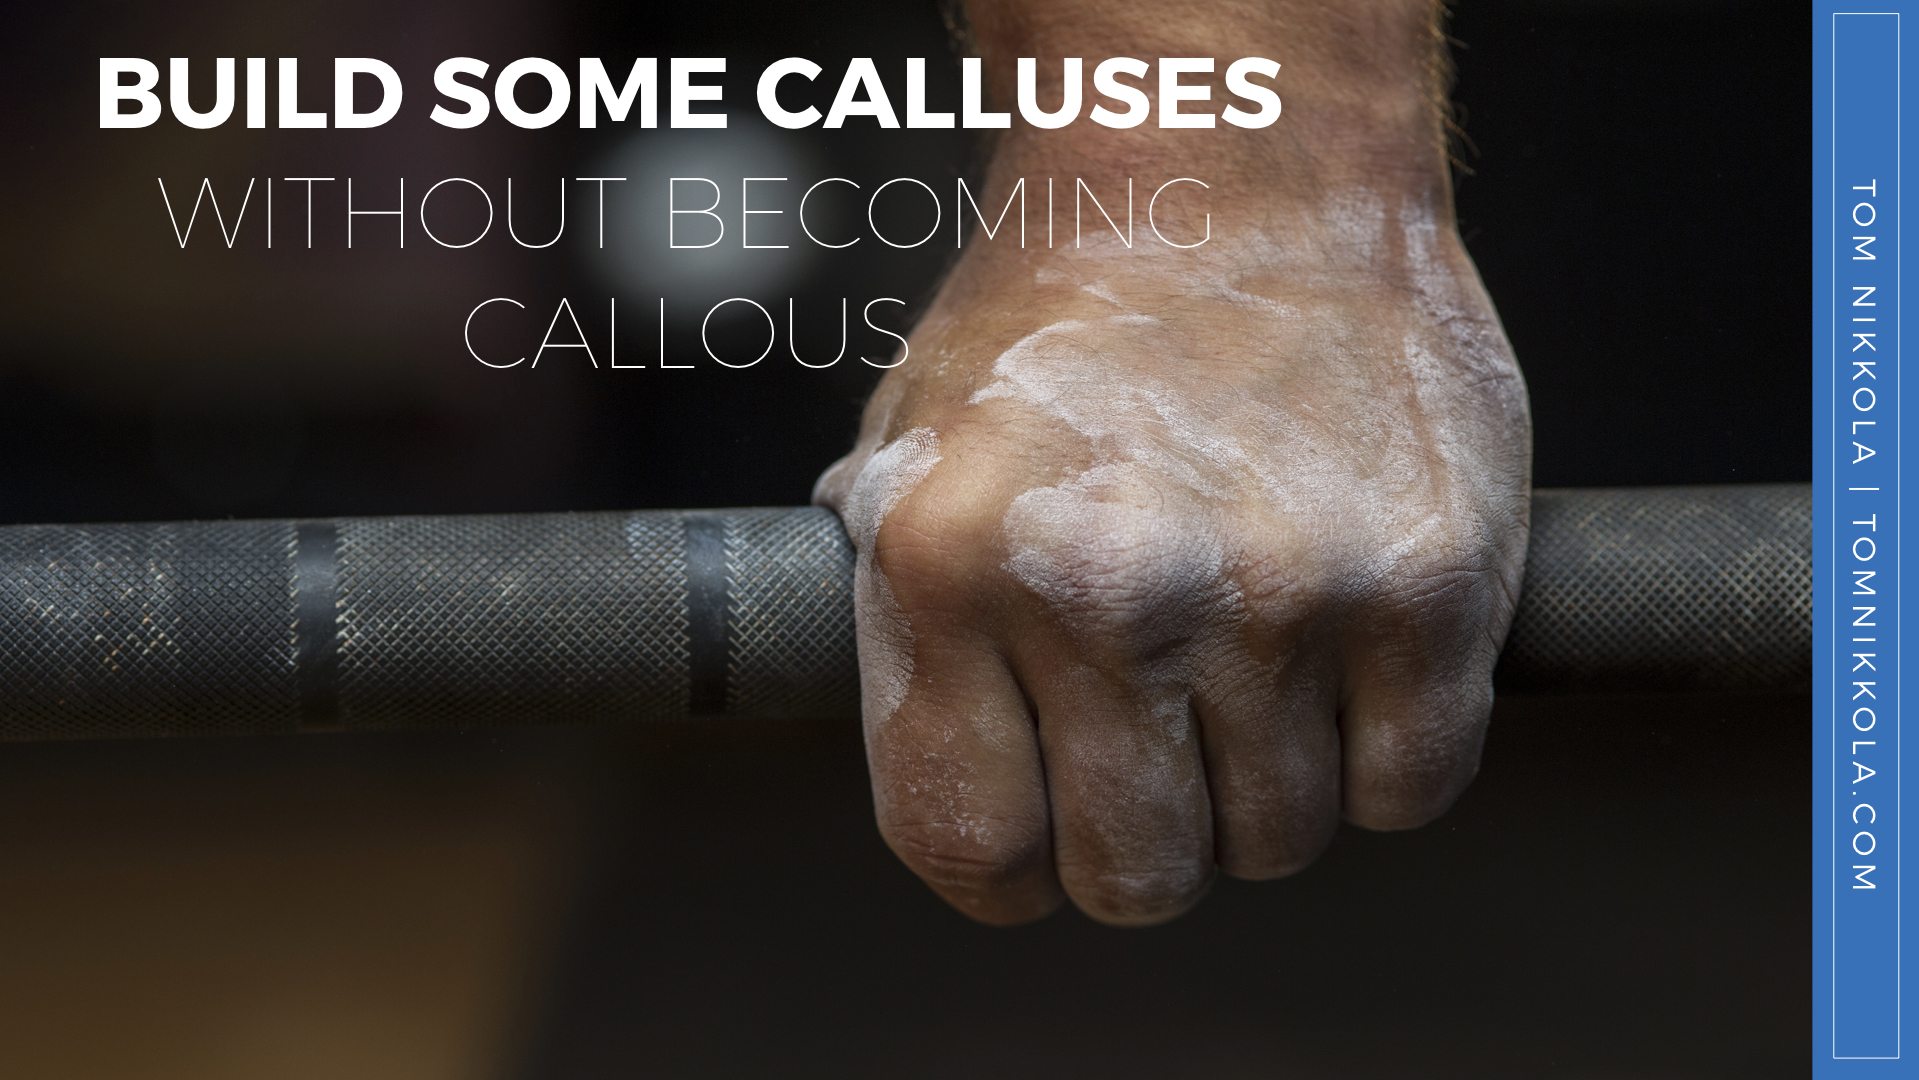 Build Calluses Without Becoming Callous | Tom Nikkola